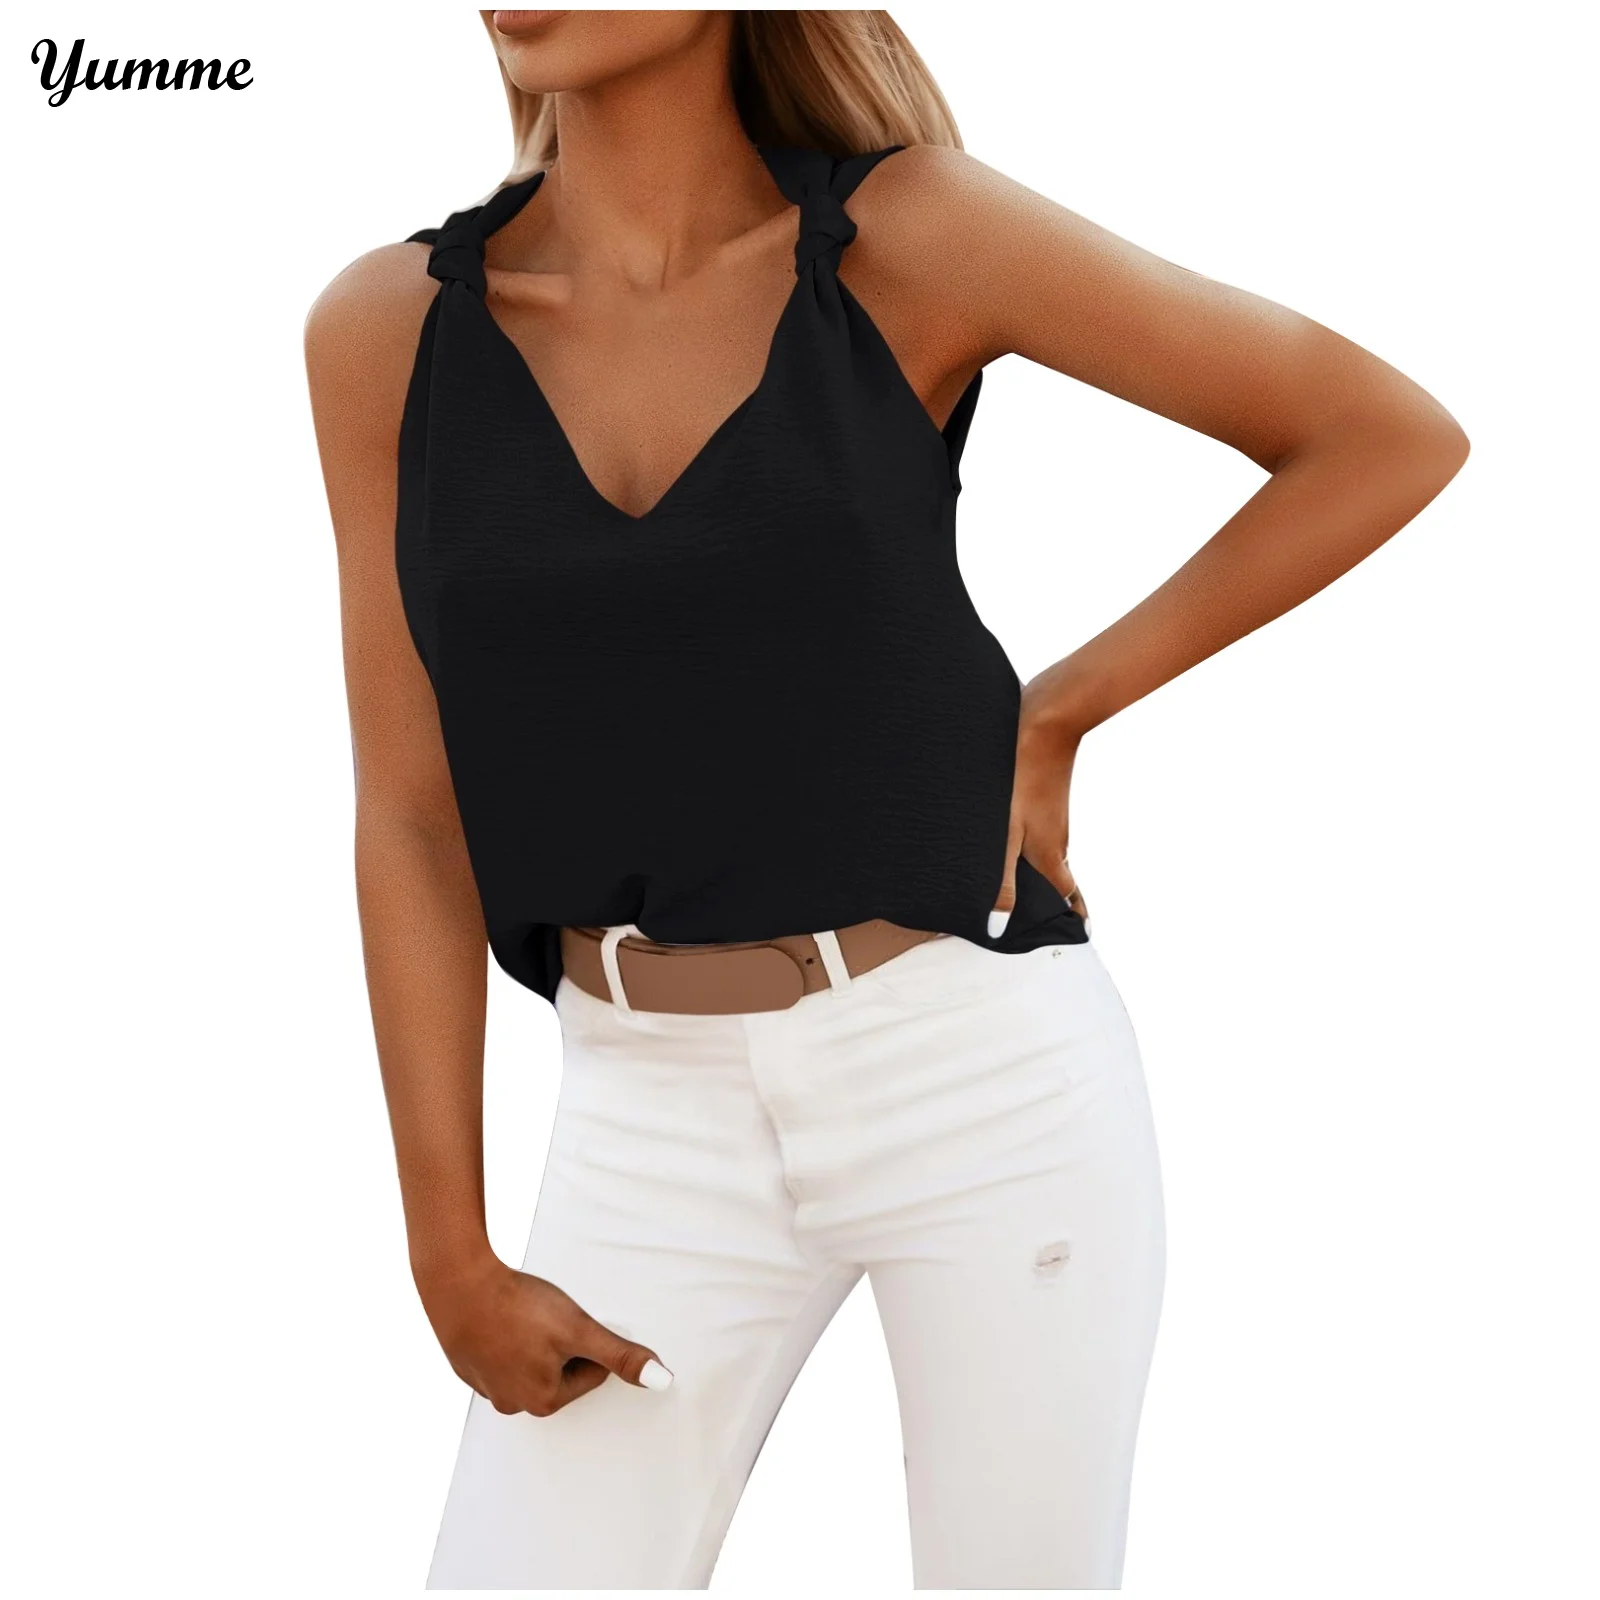 

Solid Basic Tank Top Women Sleeveless Knot Tie Up Tops Tanks Camisole Summer Harajuku Casual Ladies Vest Women's Clothes #LR4